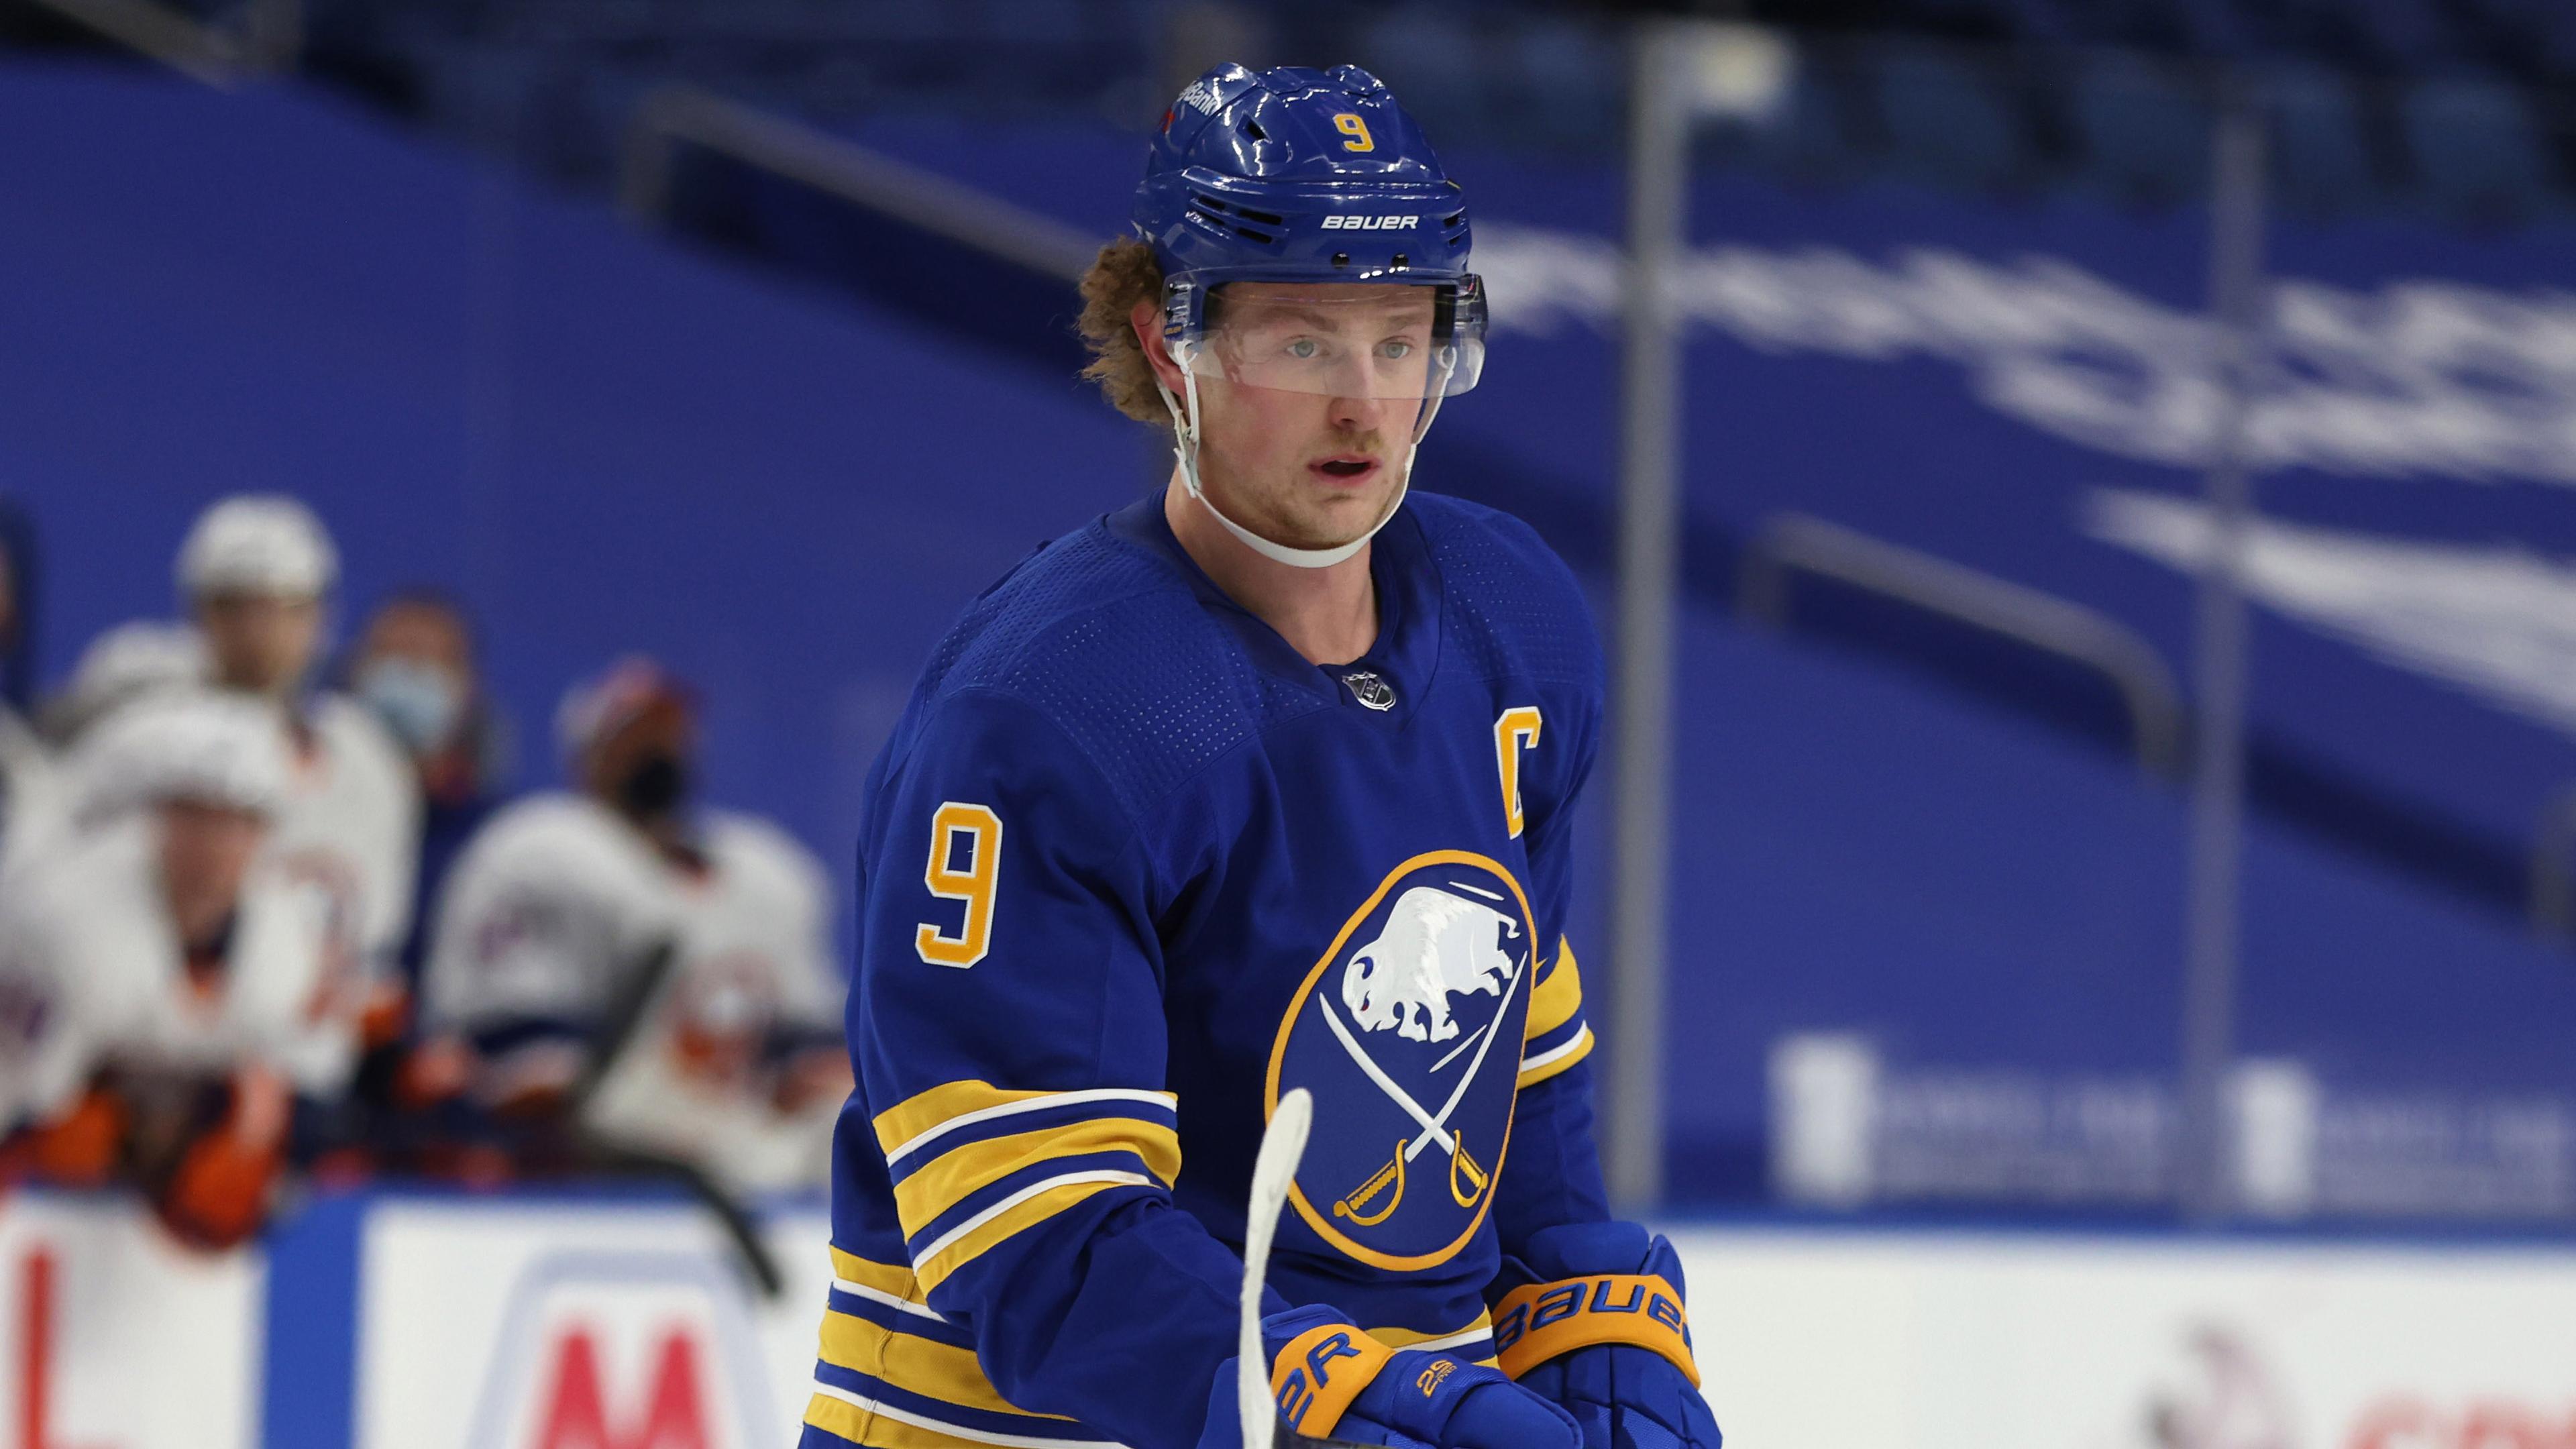 Feb 16, 2021; Buffalo, New York, USA; Buffalo Sabres center Jack Eichel (9) looks for the puck during the second period against the New York Islanders at KeyBank Center. / Timothy T. Ludwig-USA TODAY Sports